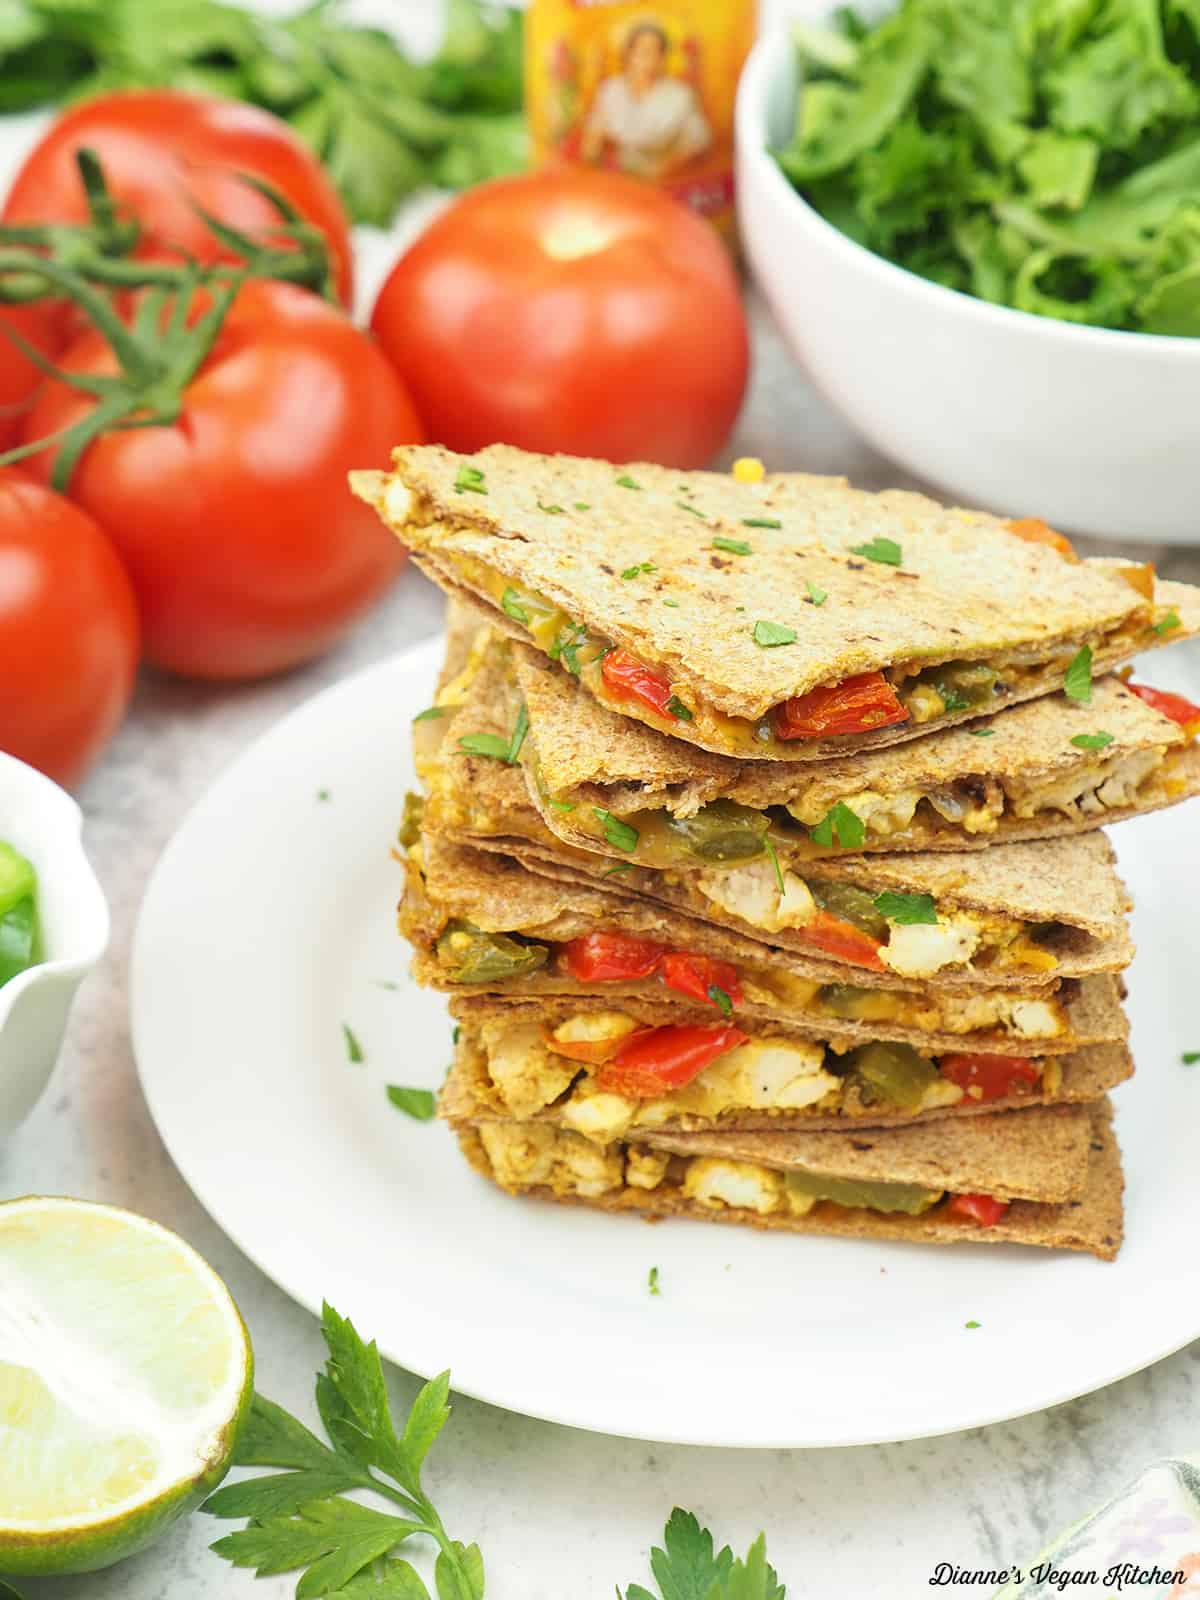 stack of breakfast quesadillas with tomatoes, salad, avocado, and lime